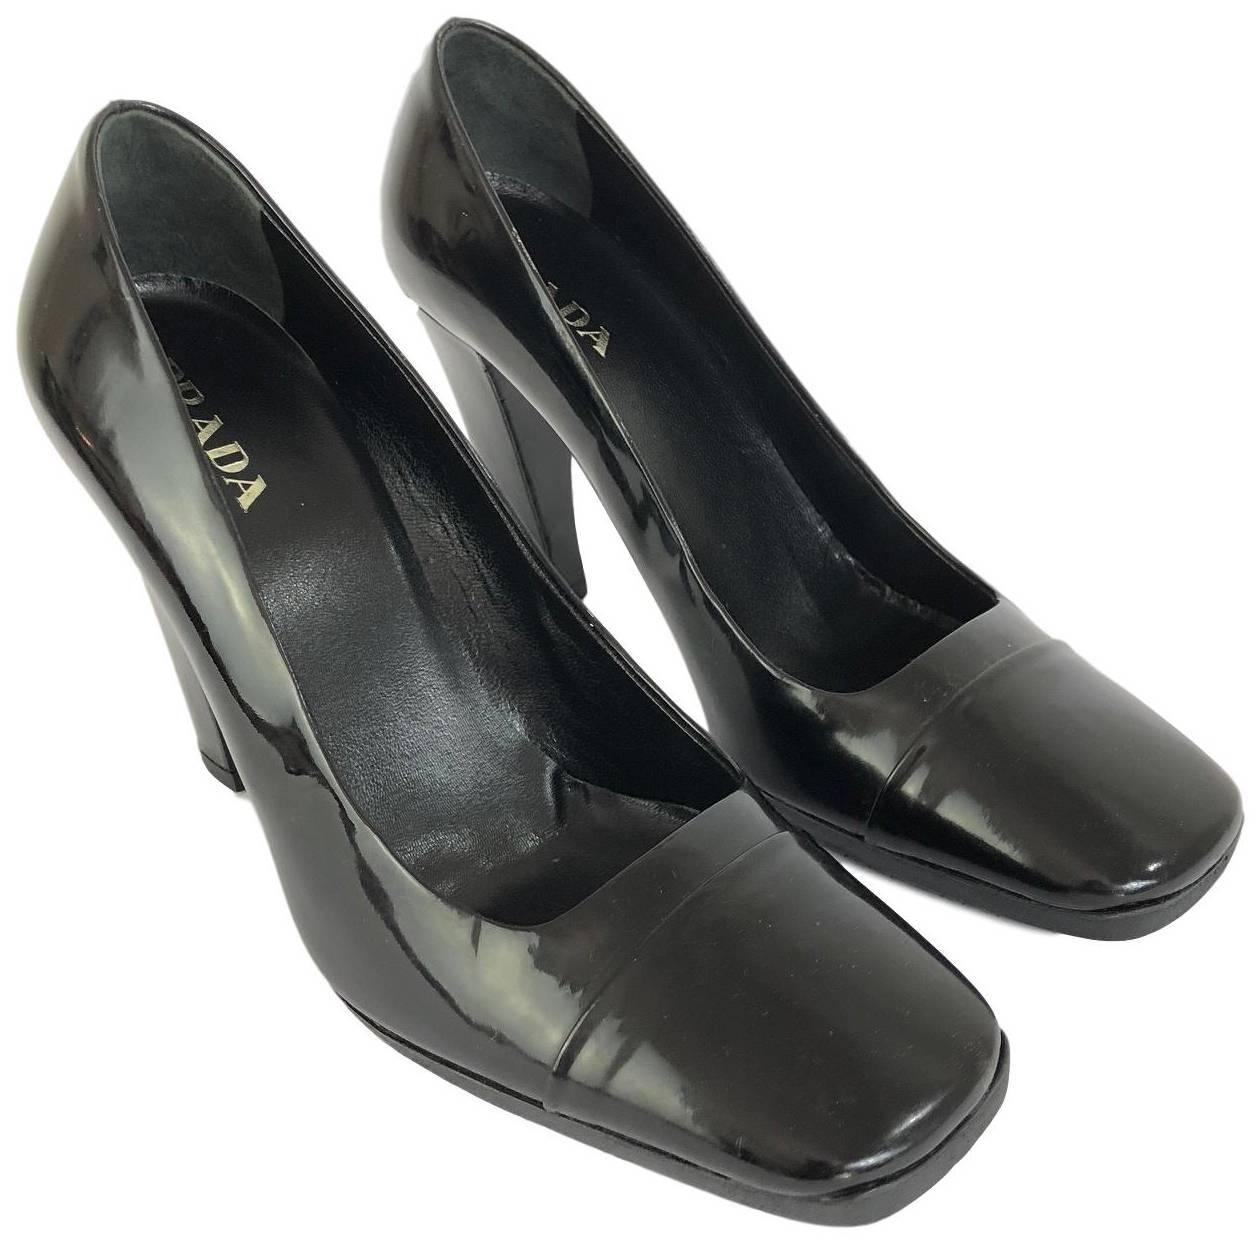 Prada Black Patent Leather Classic Pumps Italian Squared High Heels Shoes, 1990s For Sale